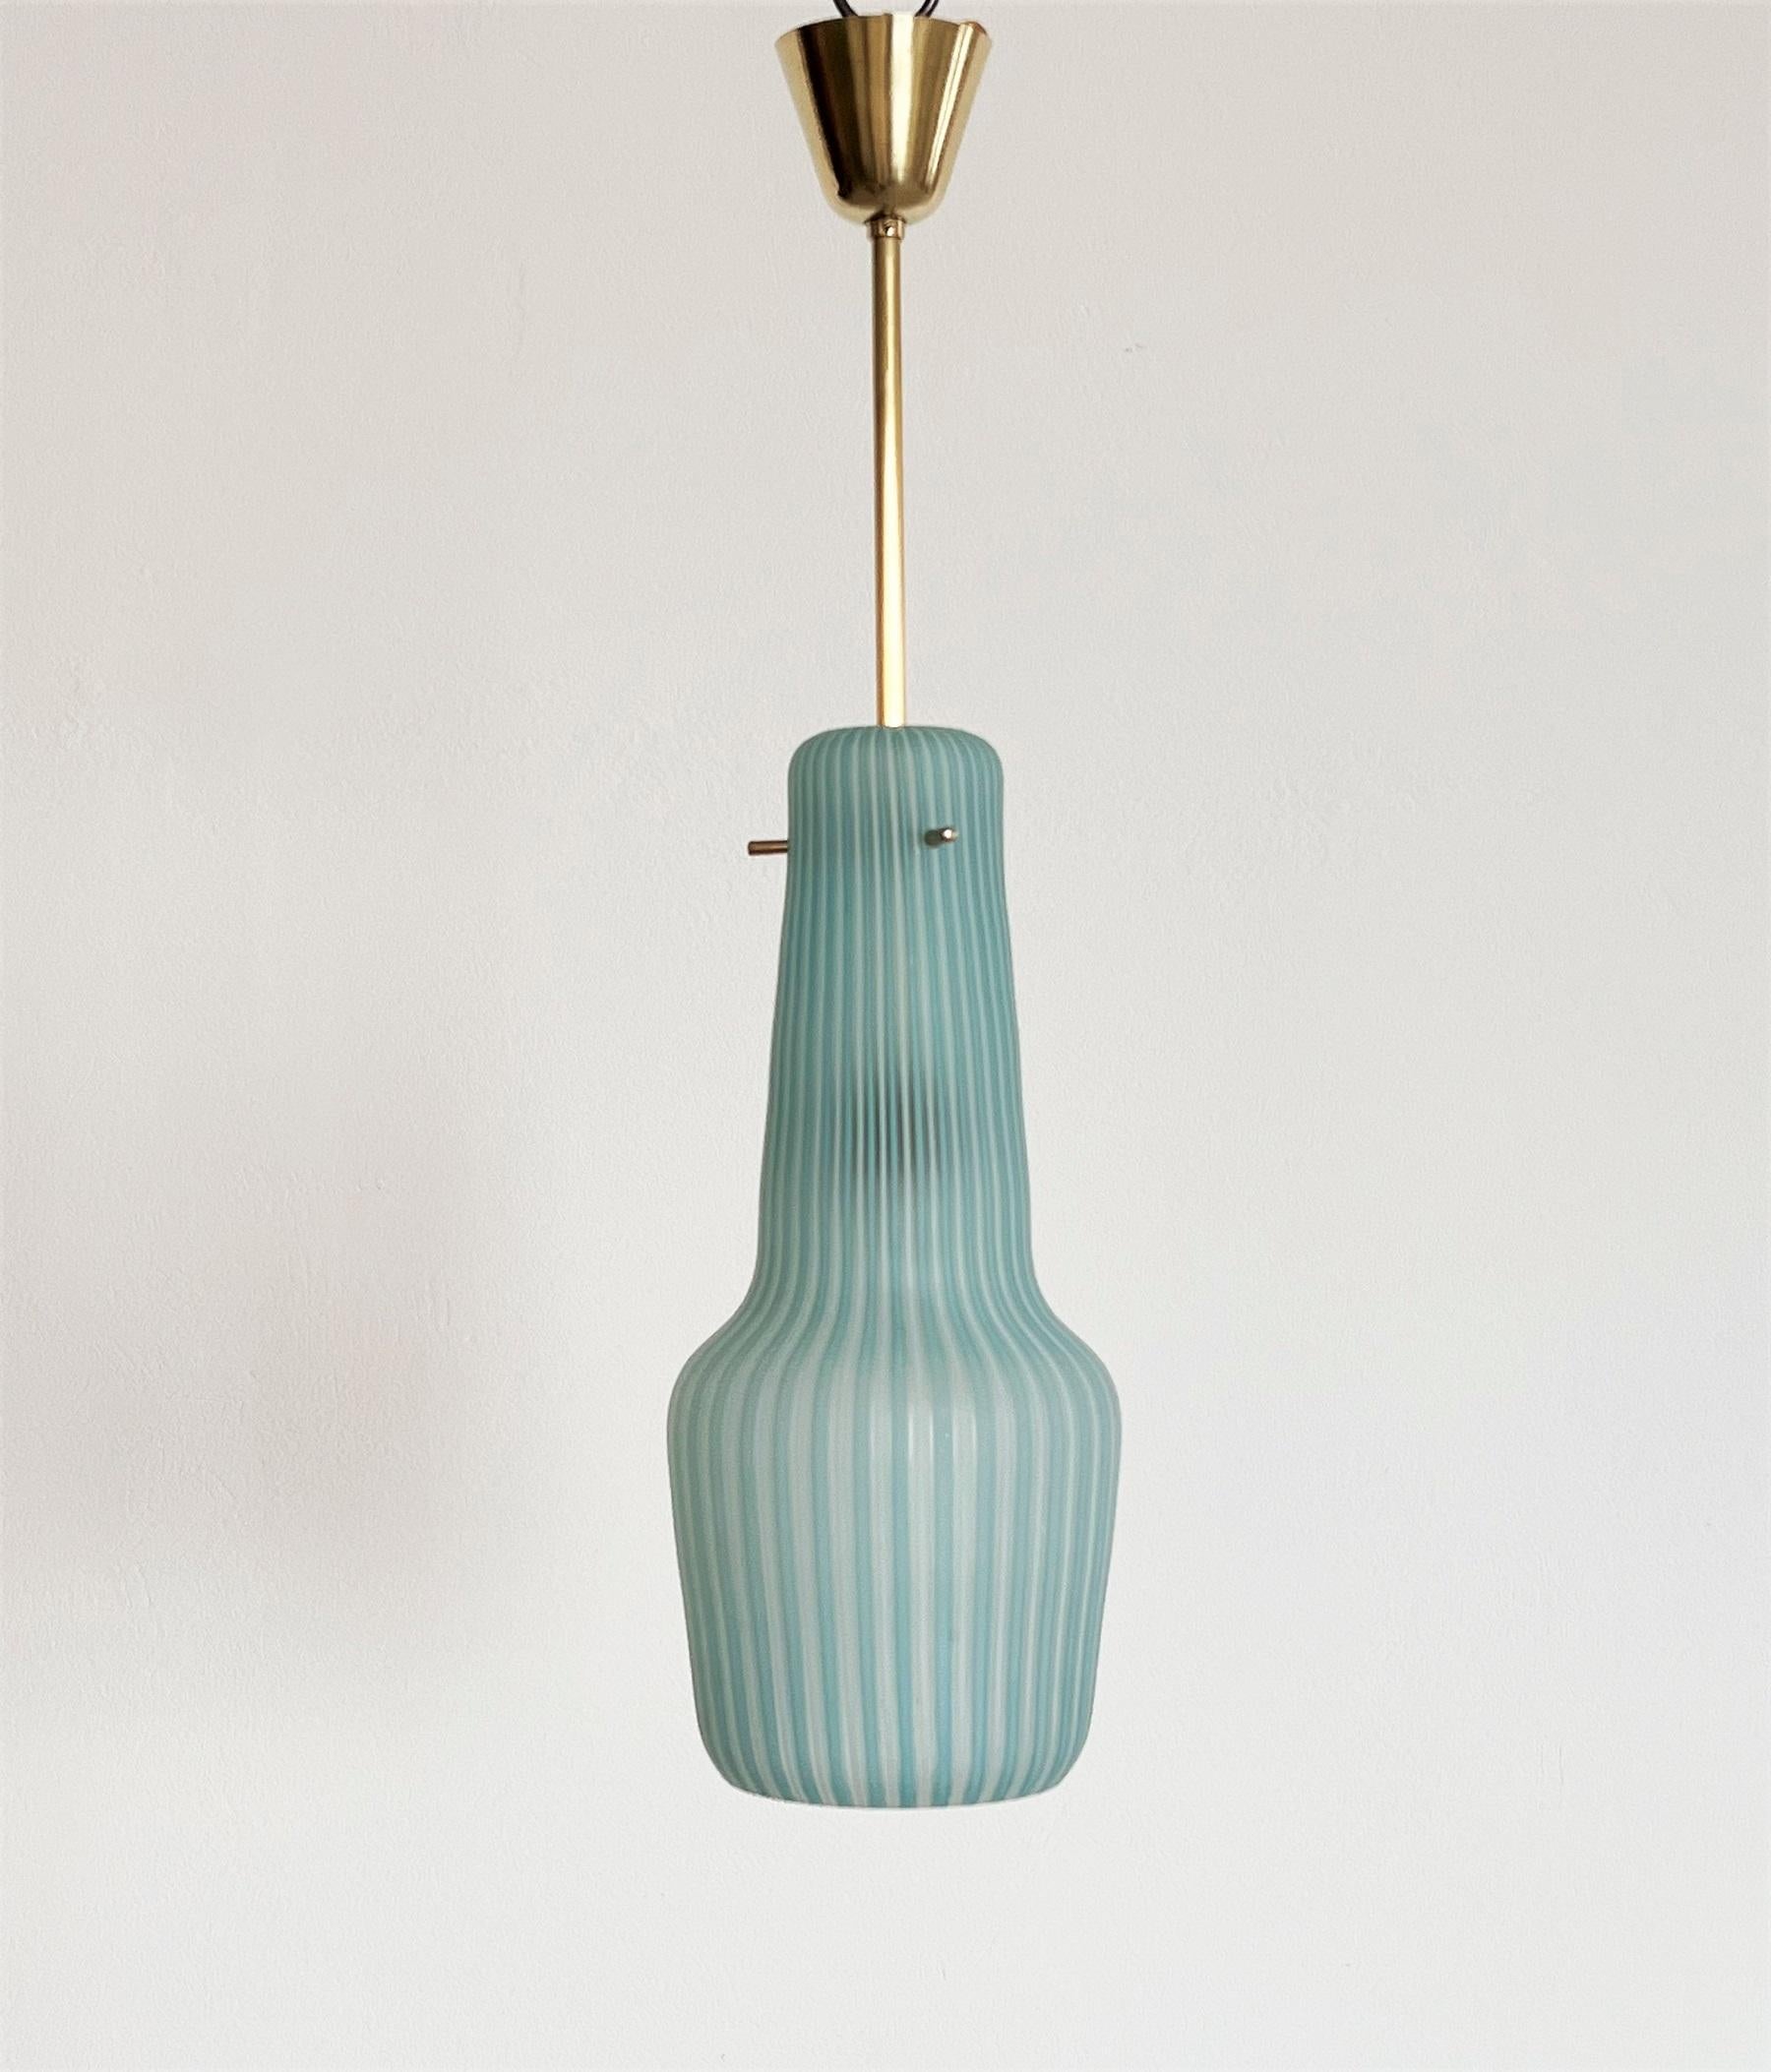 Italian Mid-Century Pendant Lamp in Striped Glass and Brass by Venini, 1960s For Sale 10